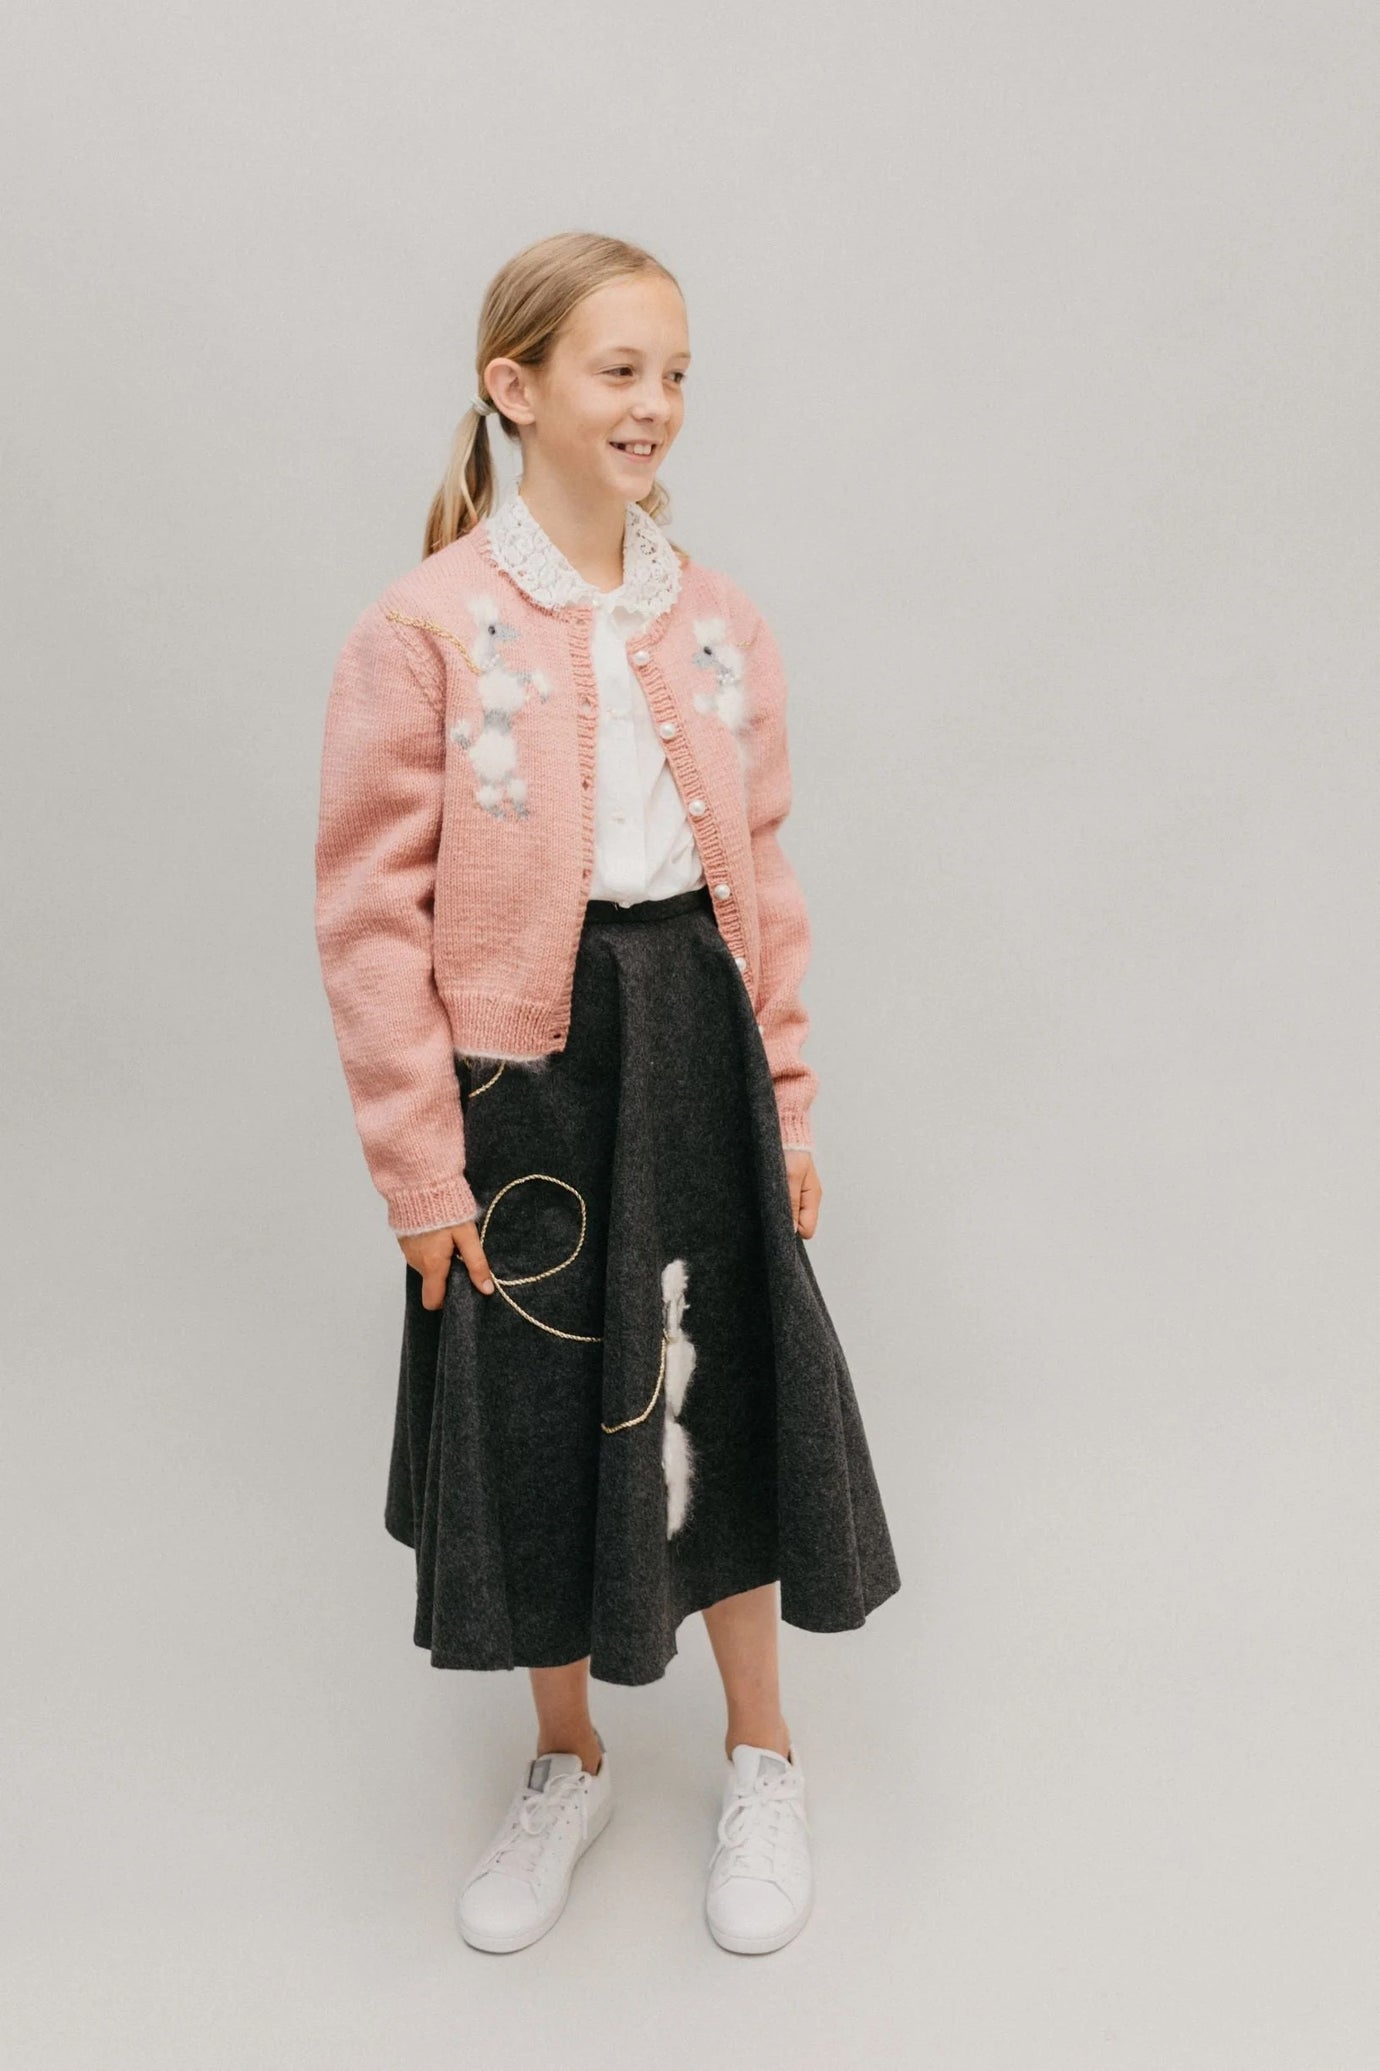 Girl wearing the 256 Child/Adult At the Hop Outfit sewing pattern from Folkwear on The Fold Line. A 1950s inspired pattern made in felt, cotton, wool, rayon, or gabardine fabric, featuring a circle skirt with poodle appliqué, short sleeve blouse with a Pe